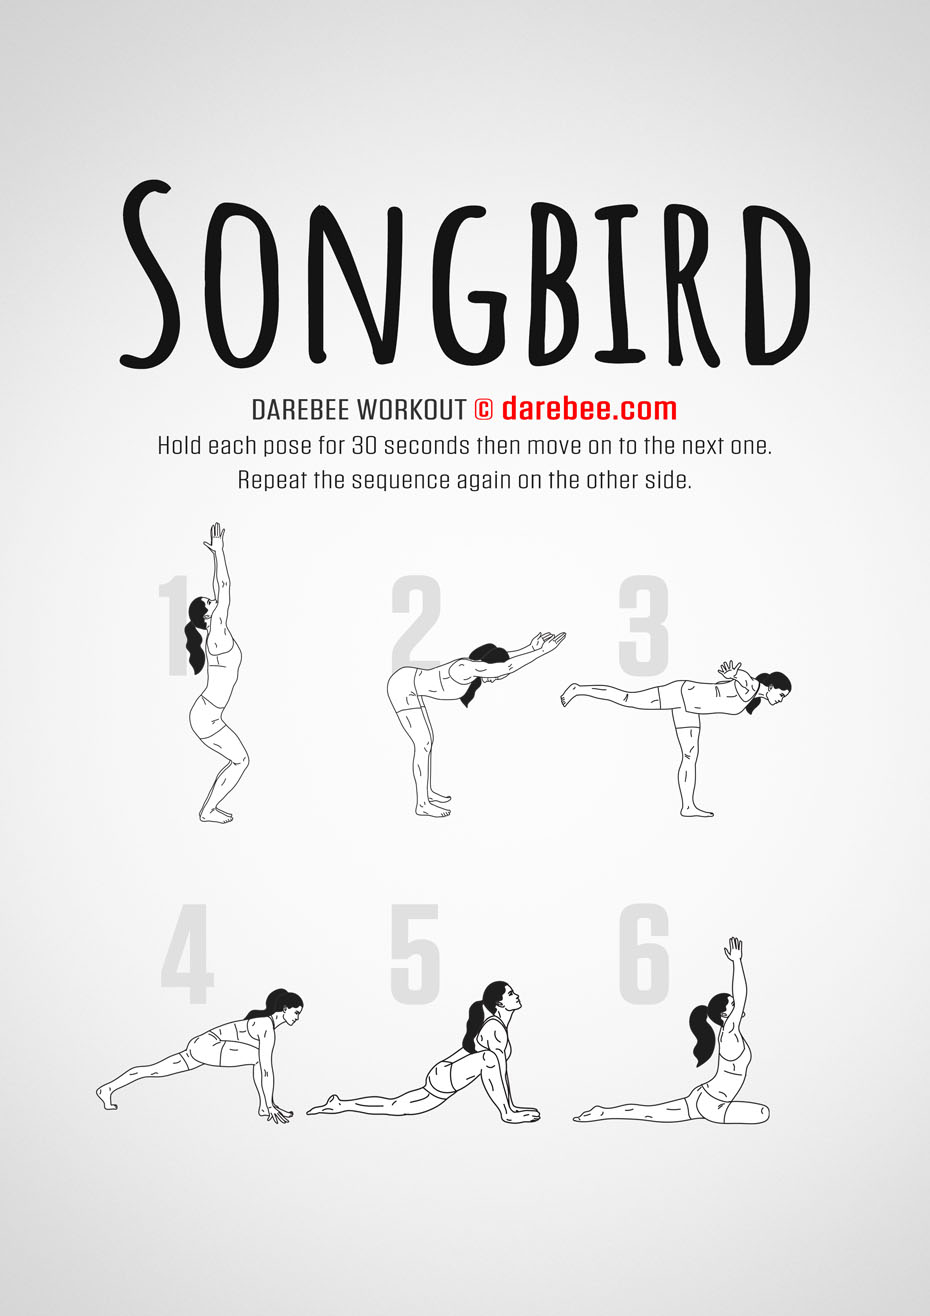 Songbird is a difficulty Level IV isometric strength workout that will improve your overall fitness level. 